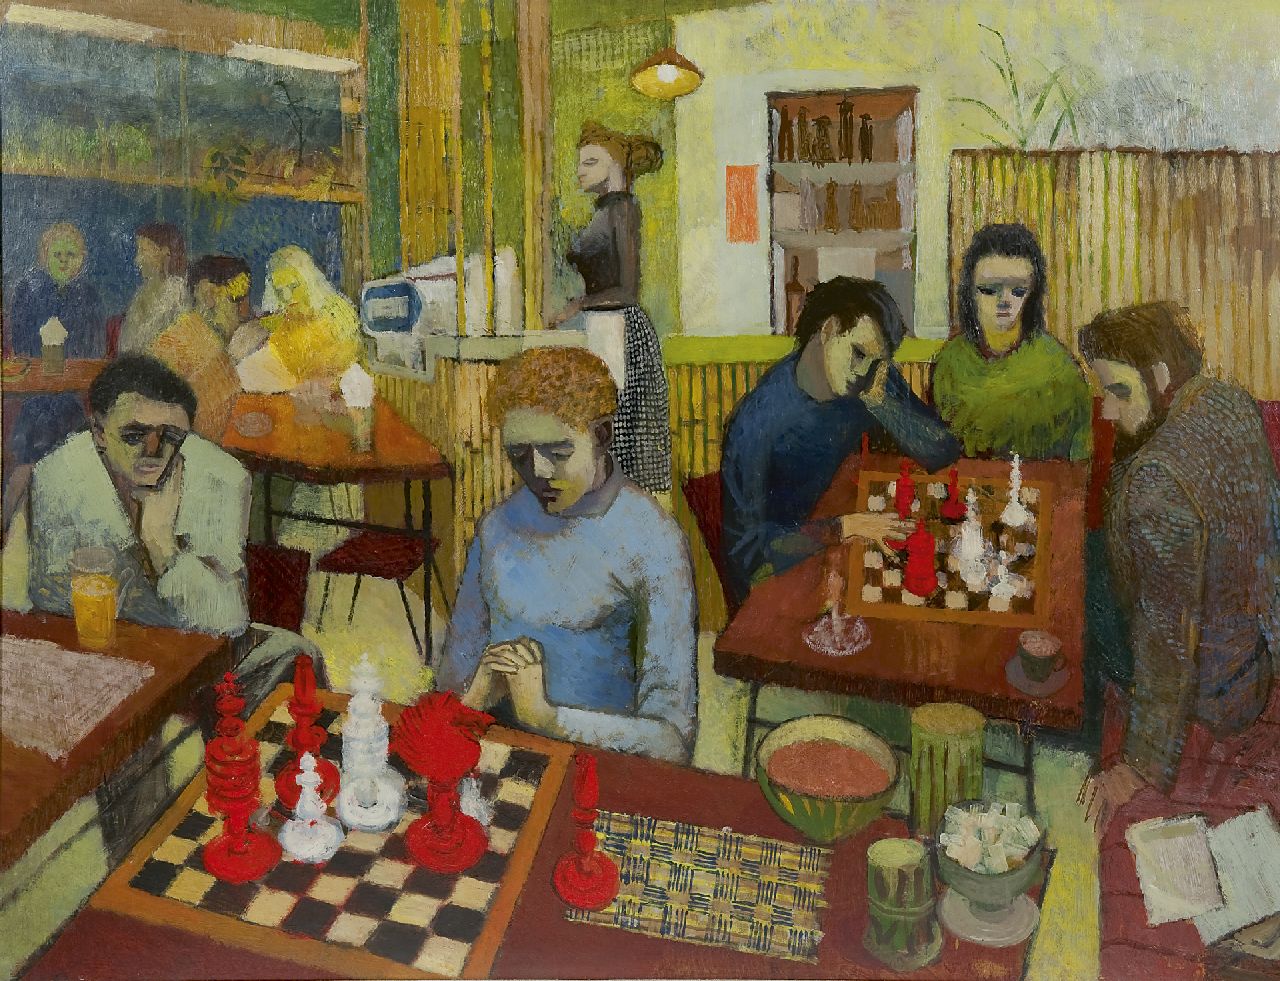 Europese School, 20e eeuw   | Europese School, 20e eeuw | Paintings offered for sale | Chess at the café, oil on painter's board 68.4 x 91.6 cm, signed l.r. with initials 'R.S.' and dated 1956